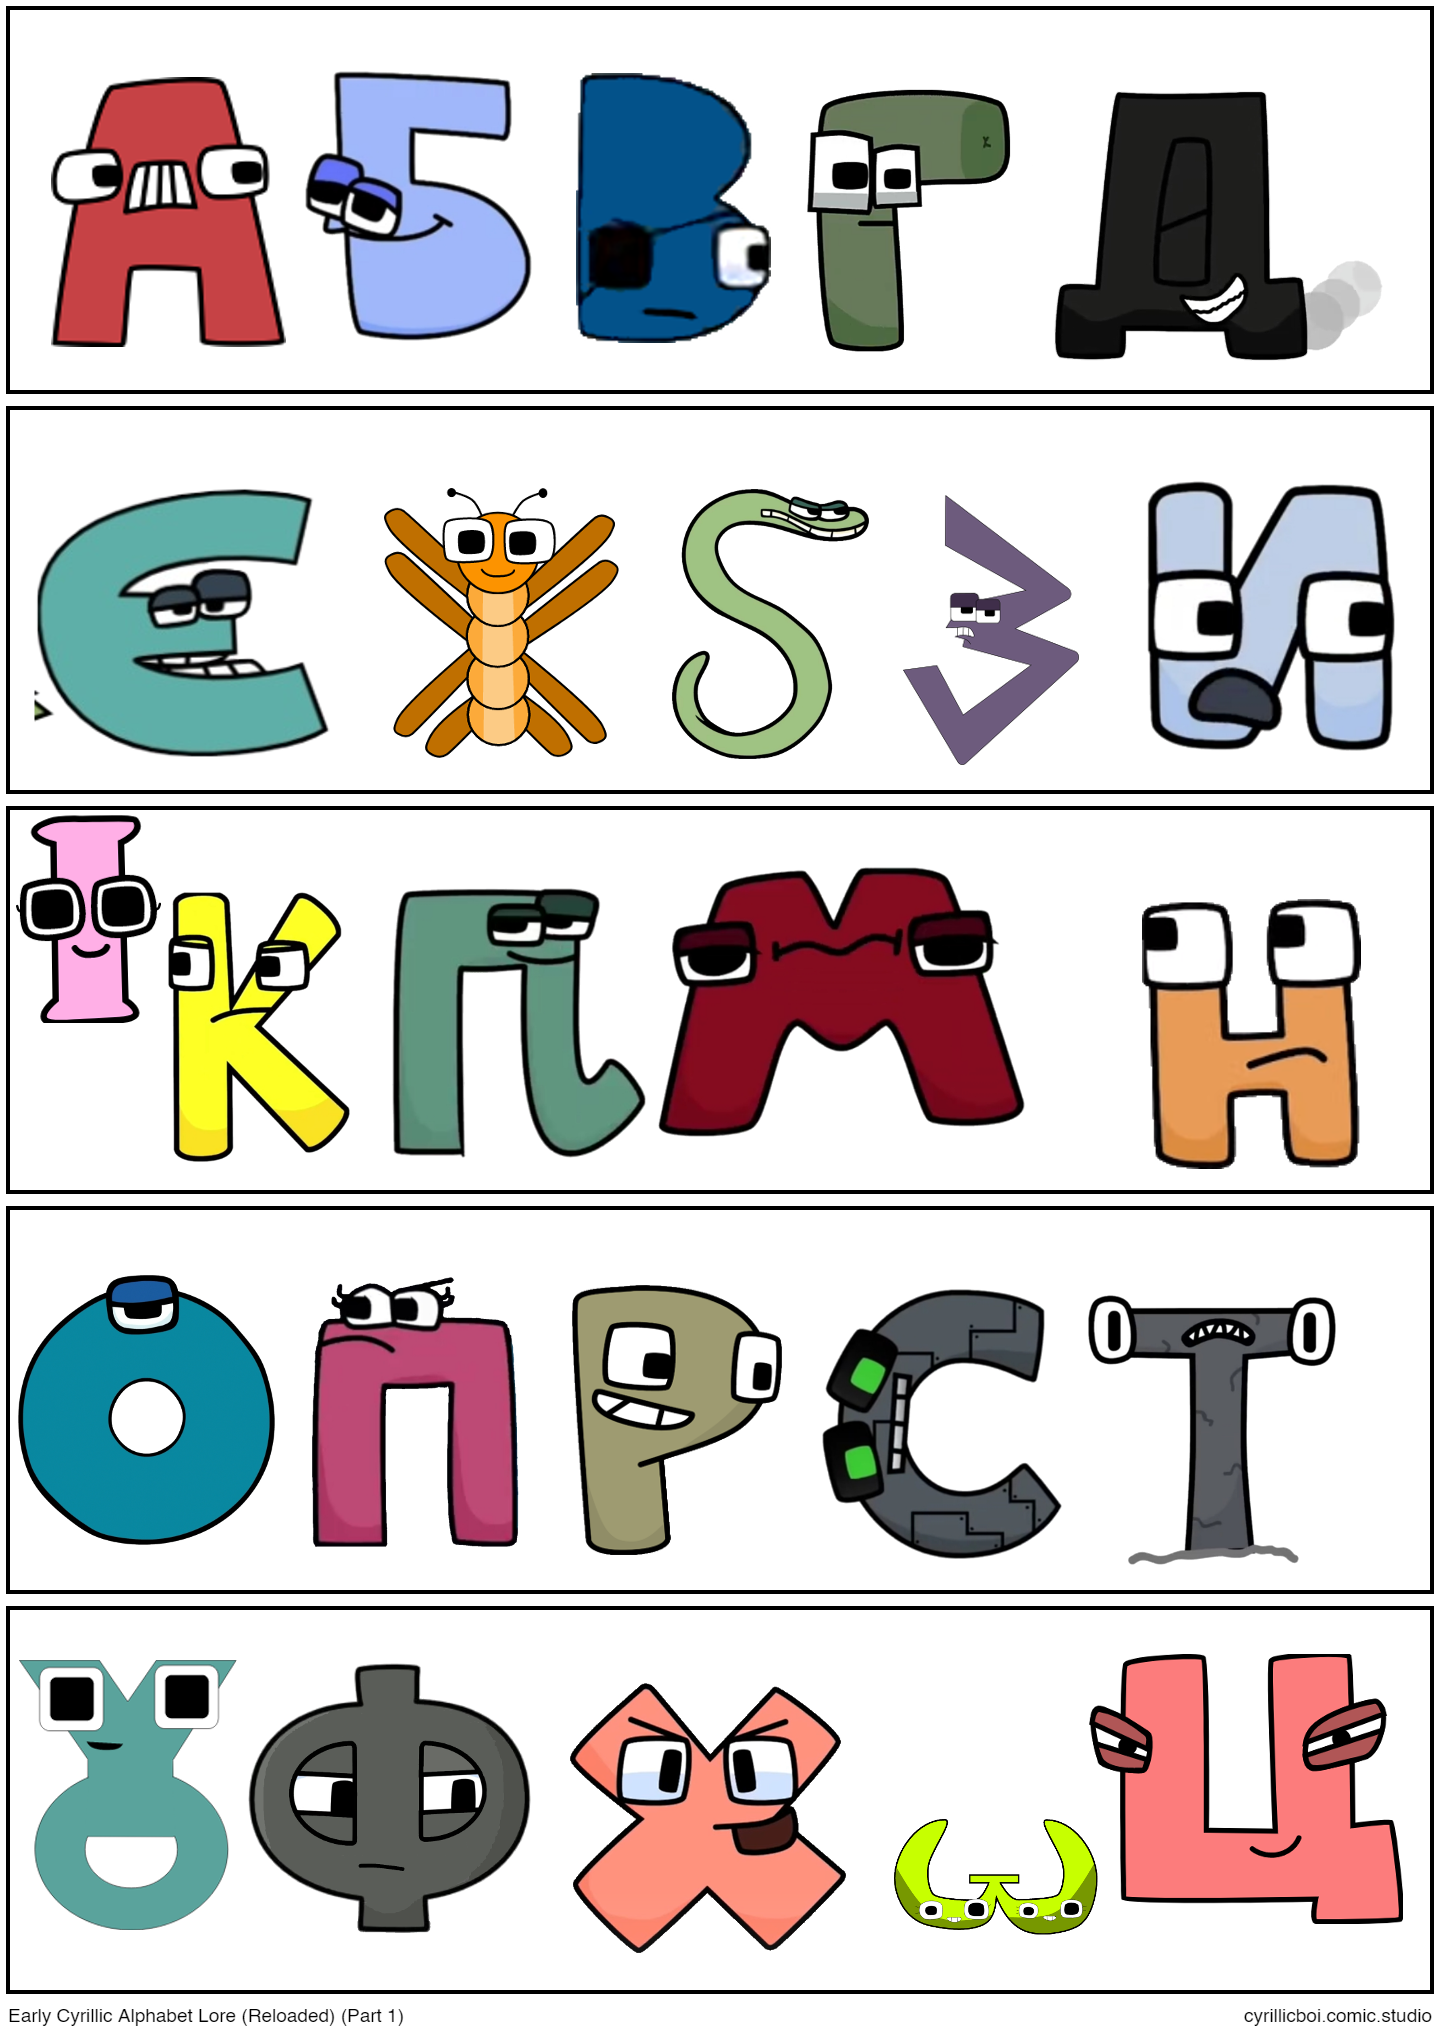 Early Cyrillic Alphabet Lore (Reloaded) (Part 1)